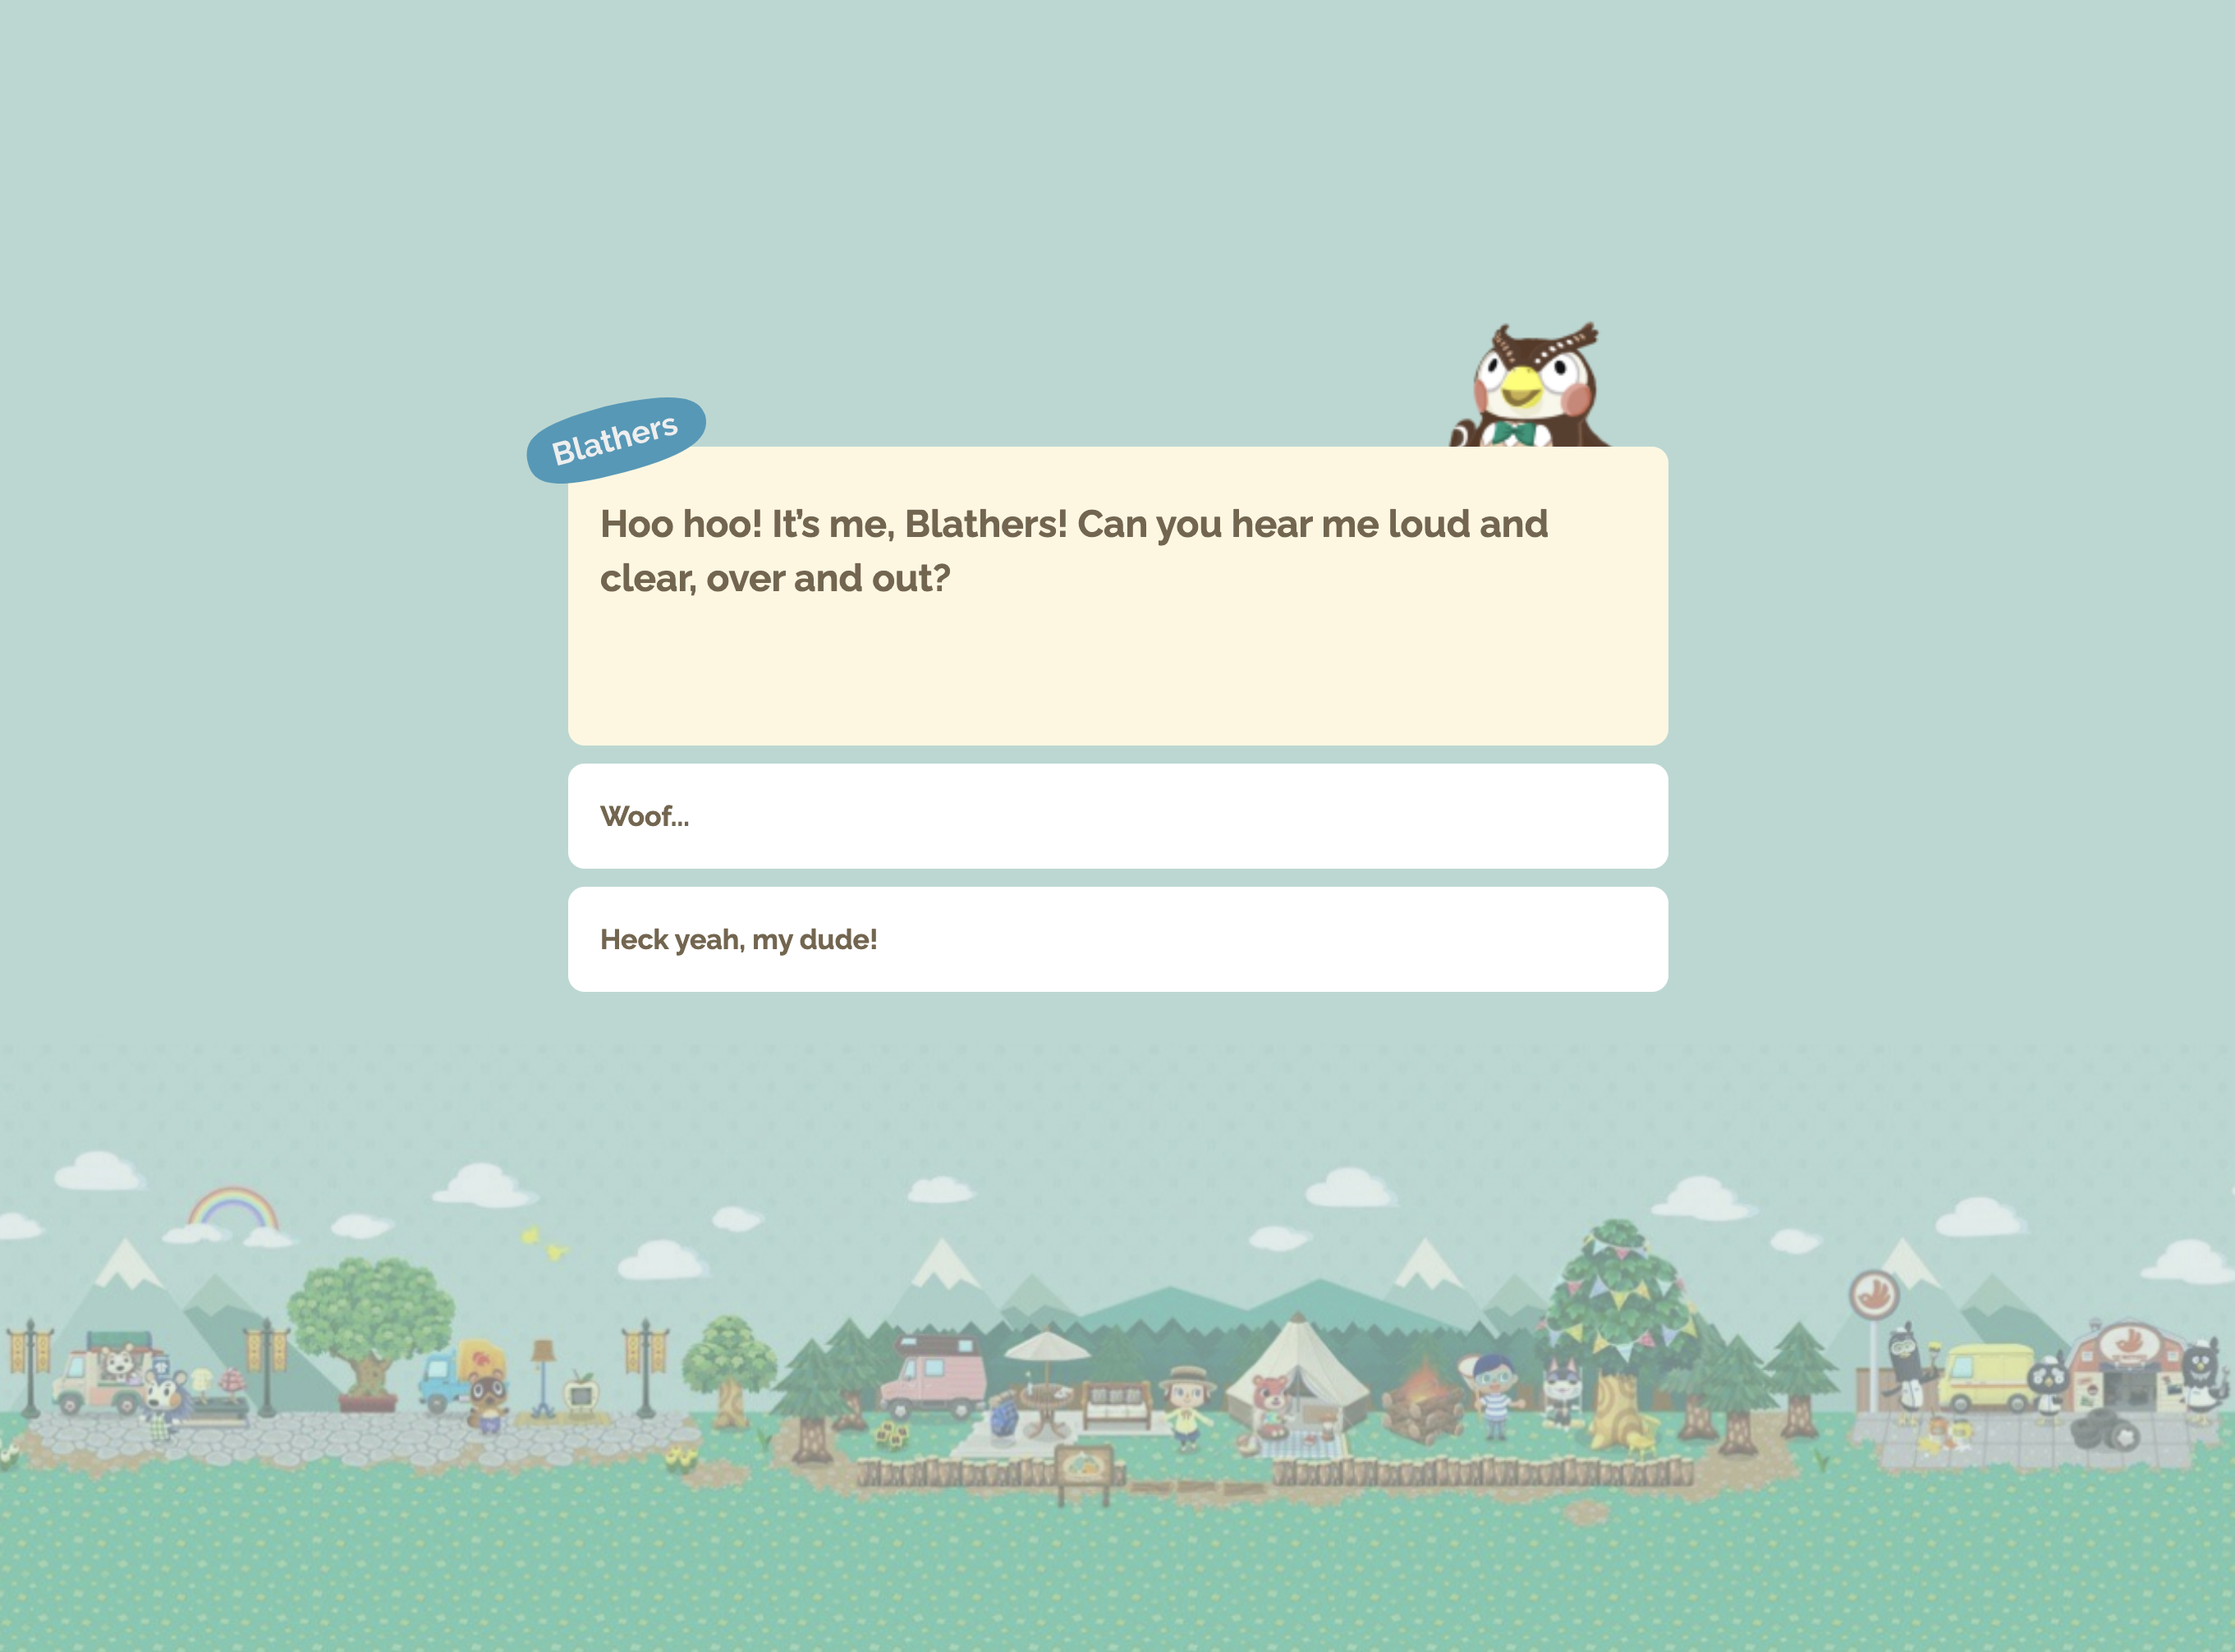 A text adventure game inspired by Animal Crossing